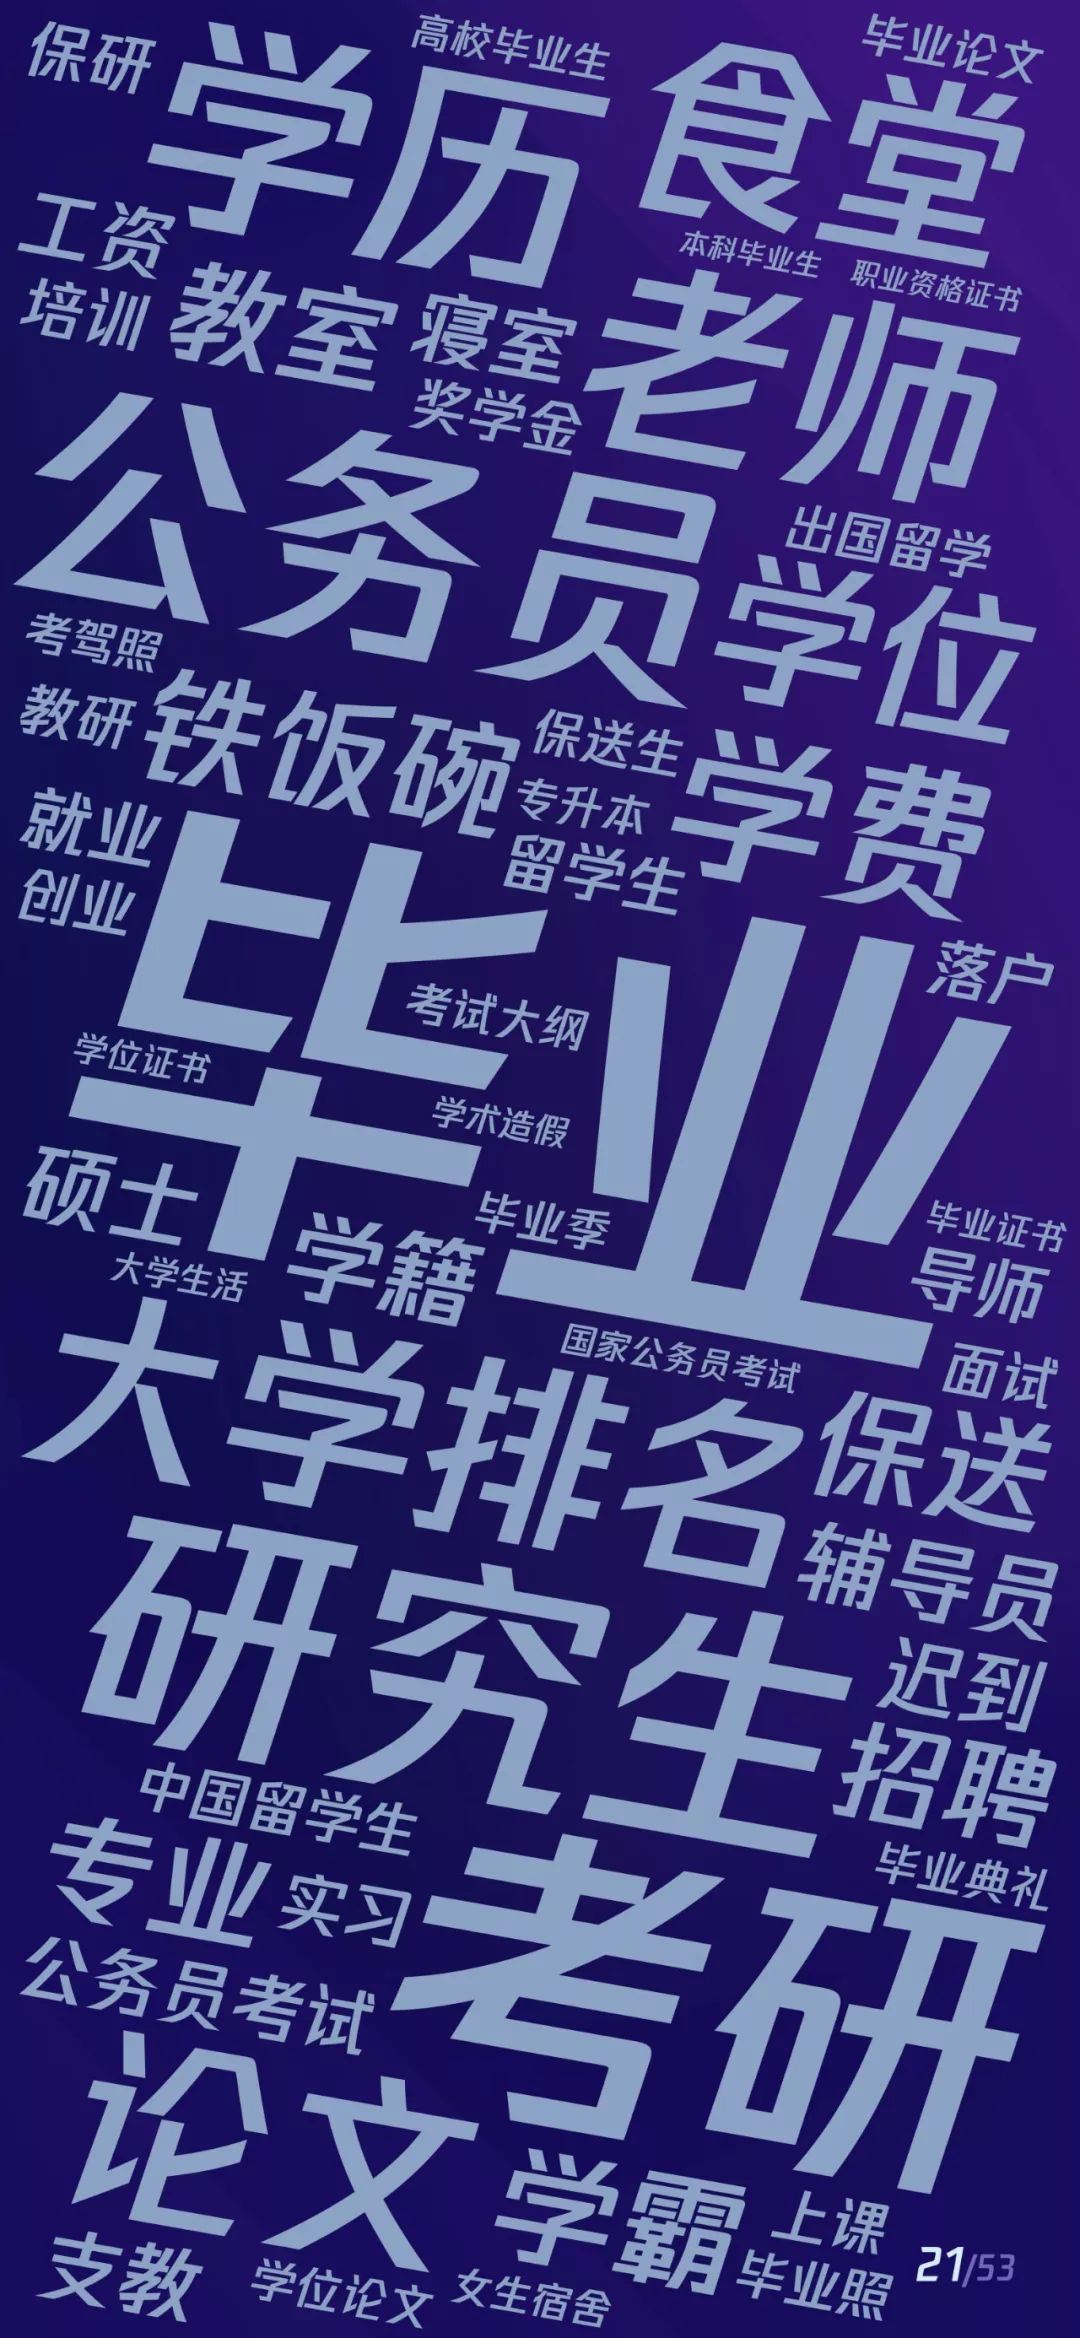 Tencent News ConTech Data Labs Releases New Educational Content Dissemination Report for 2019